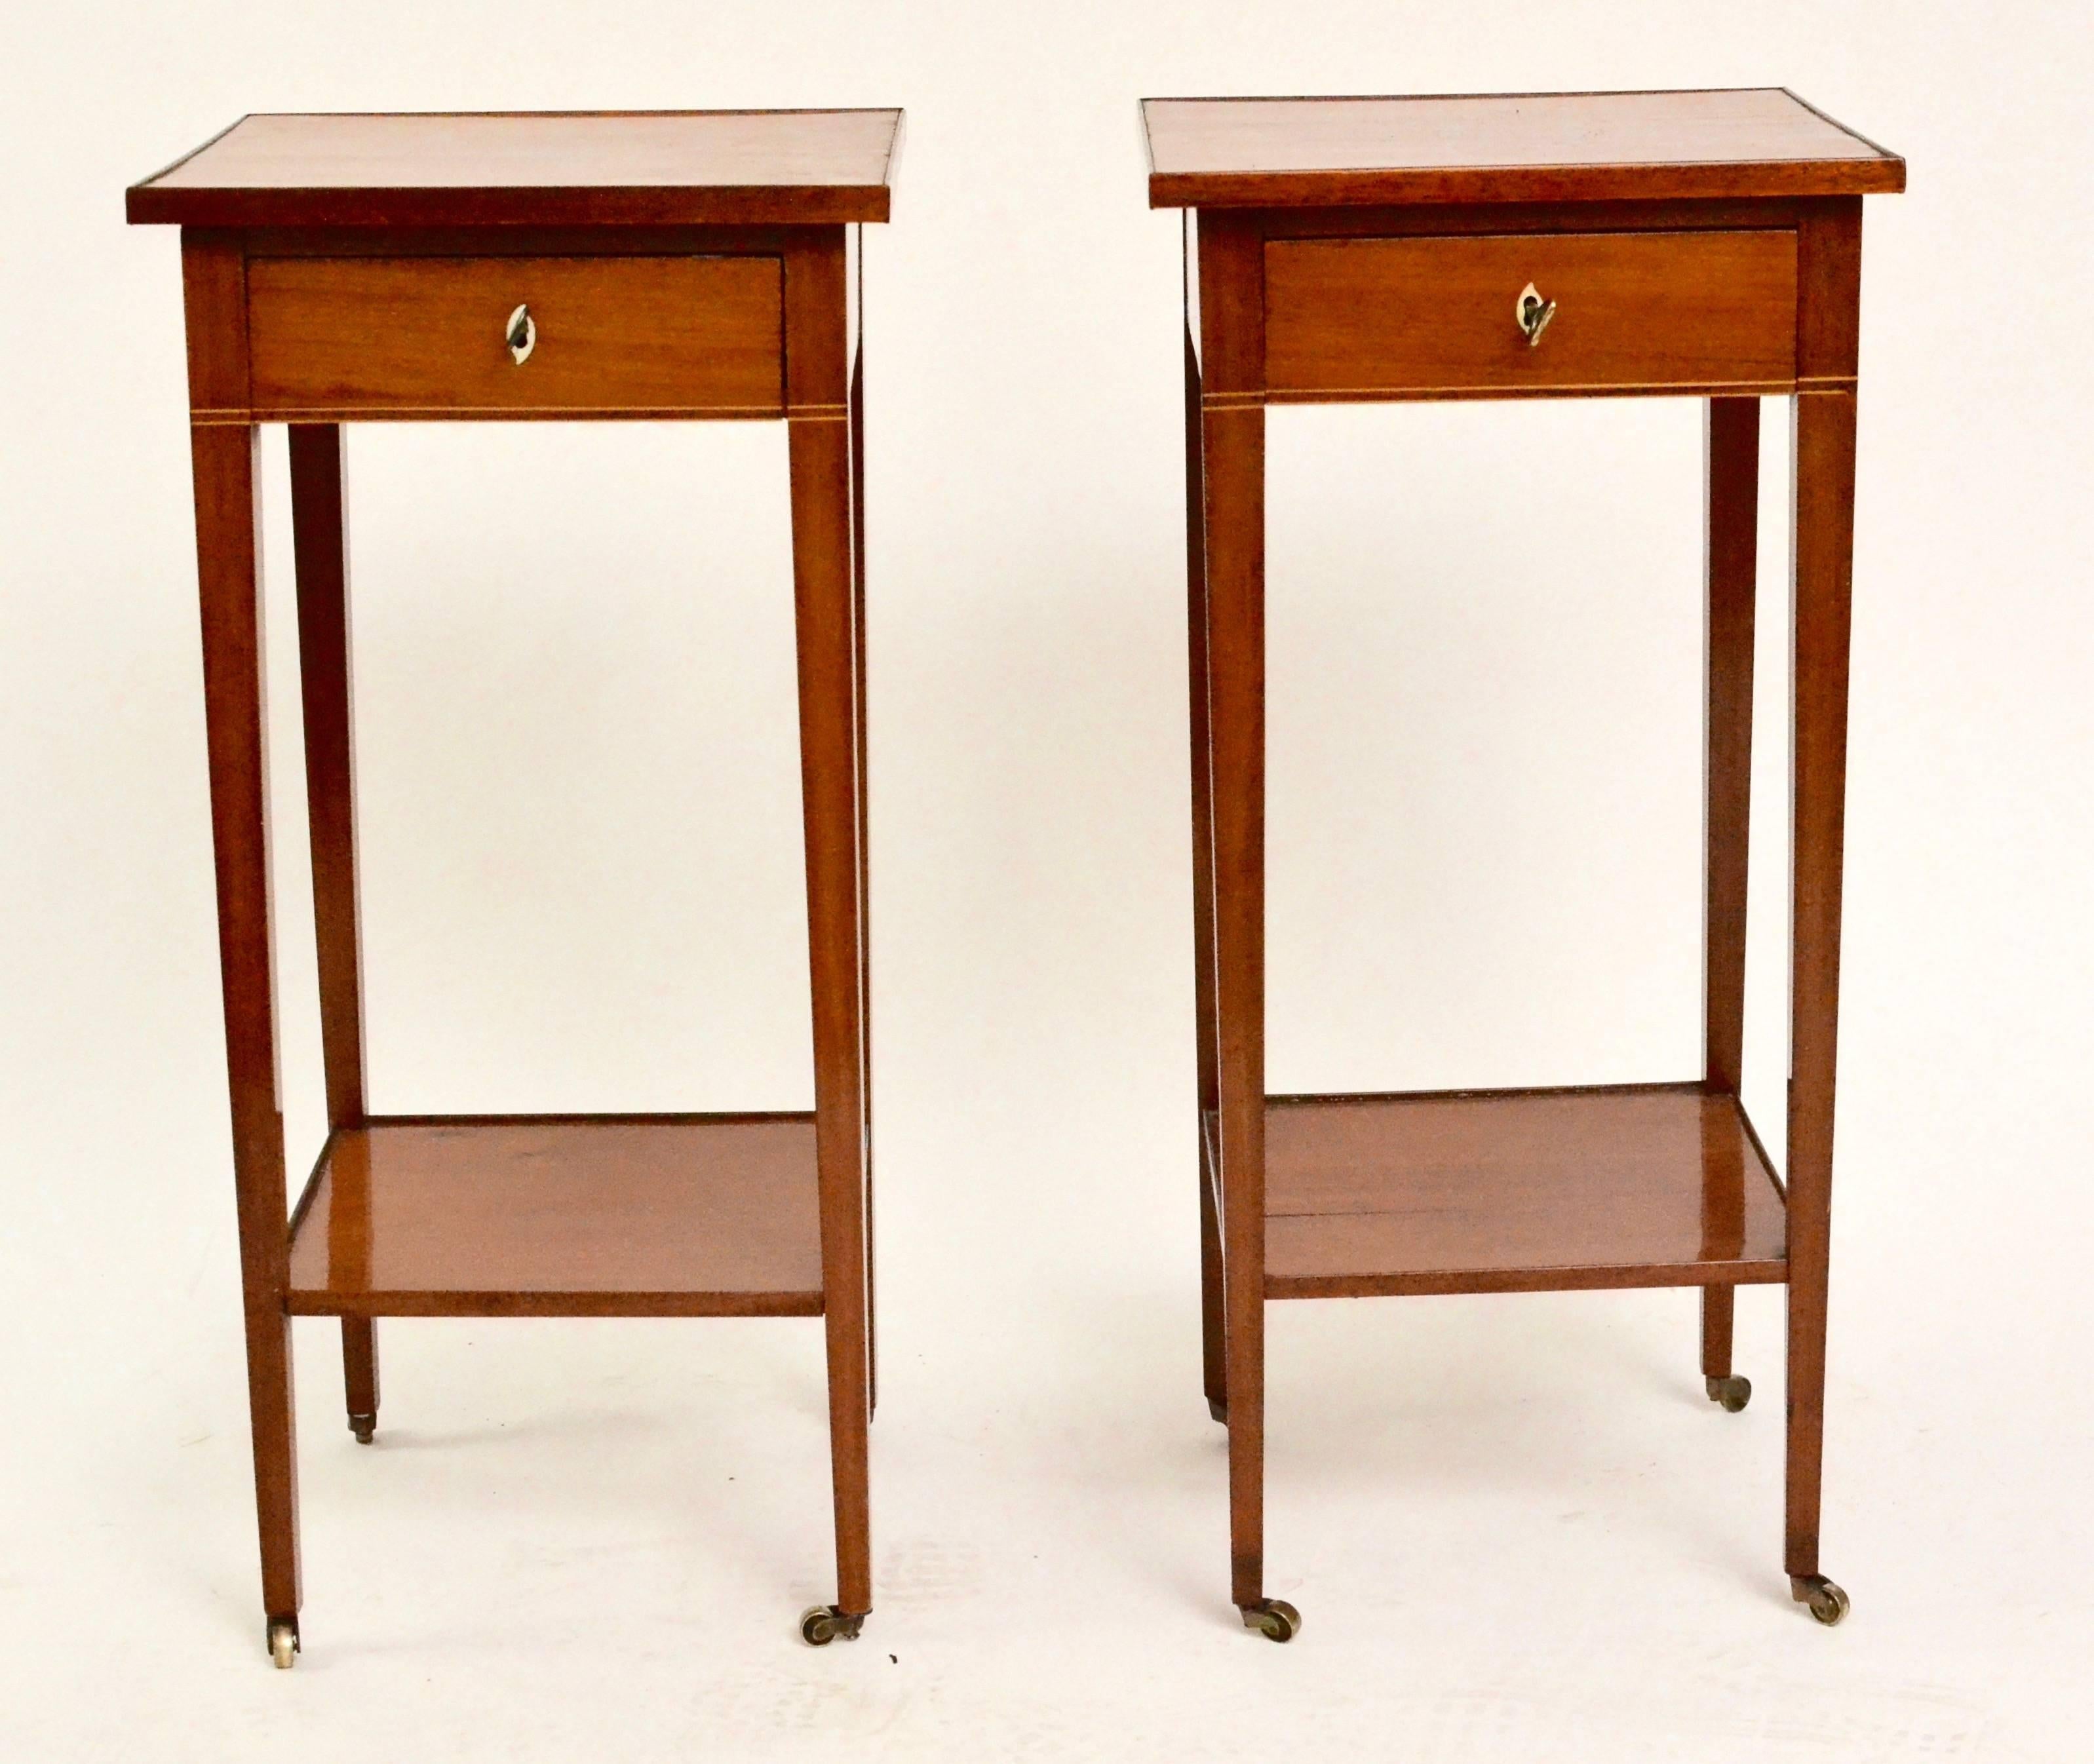 A pair of Swedish late Gustavian mahogany bedside tables or sofa tables. Late 18th century.